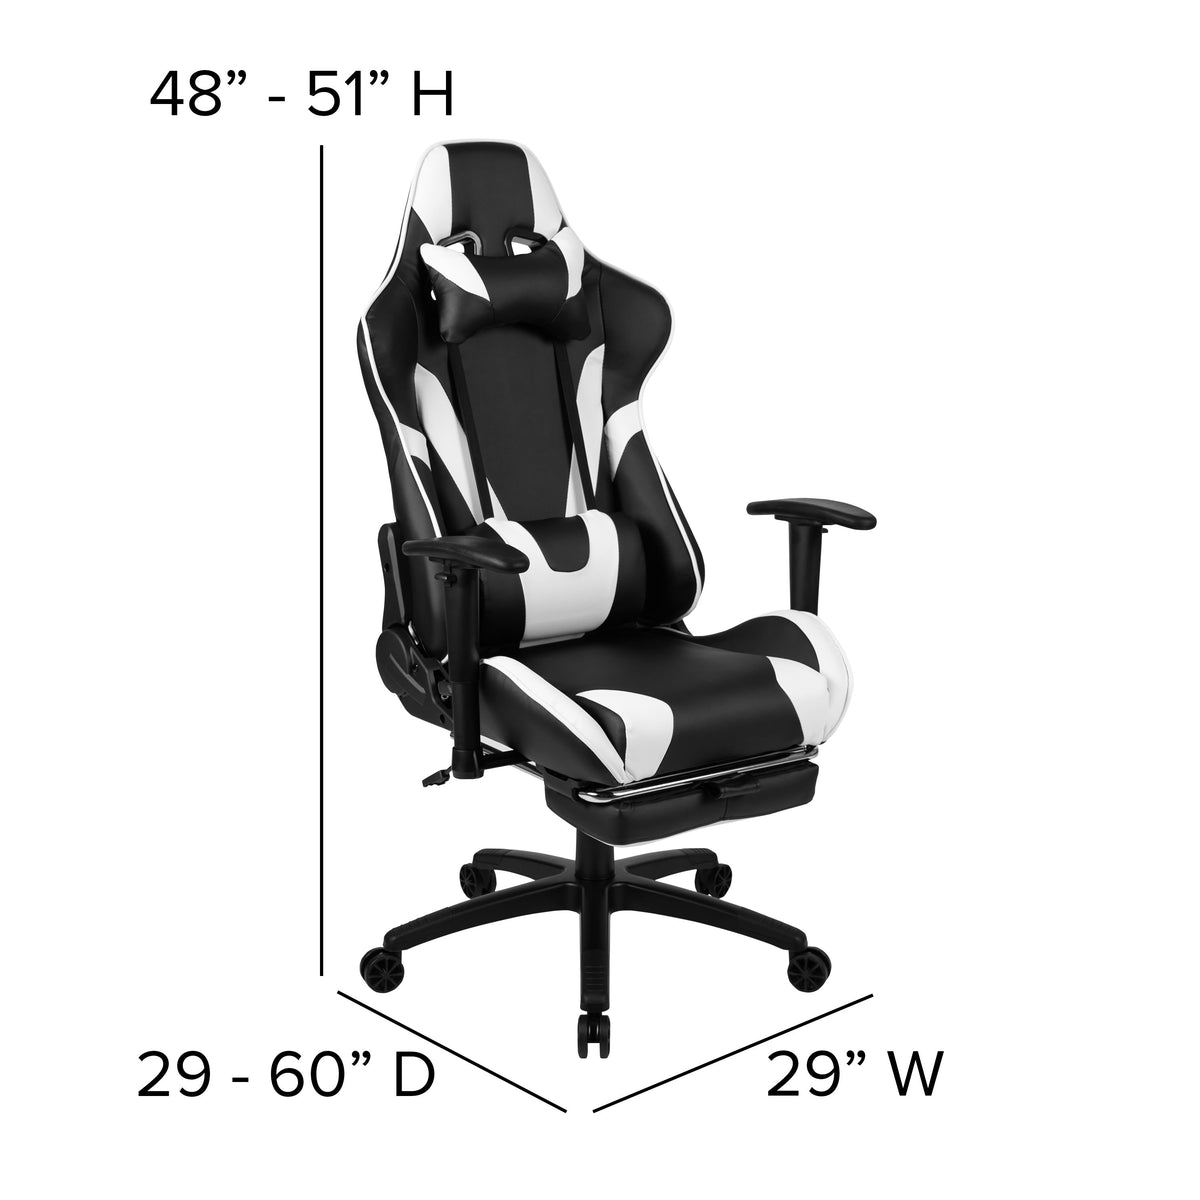 Black |#| Black Gaming Desk & Chair Set with Cup Holder, Headphone Hook, and Monitor Stand